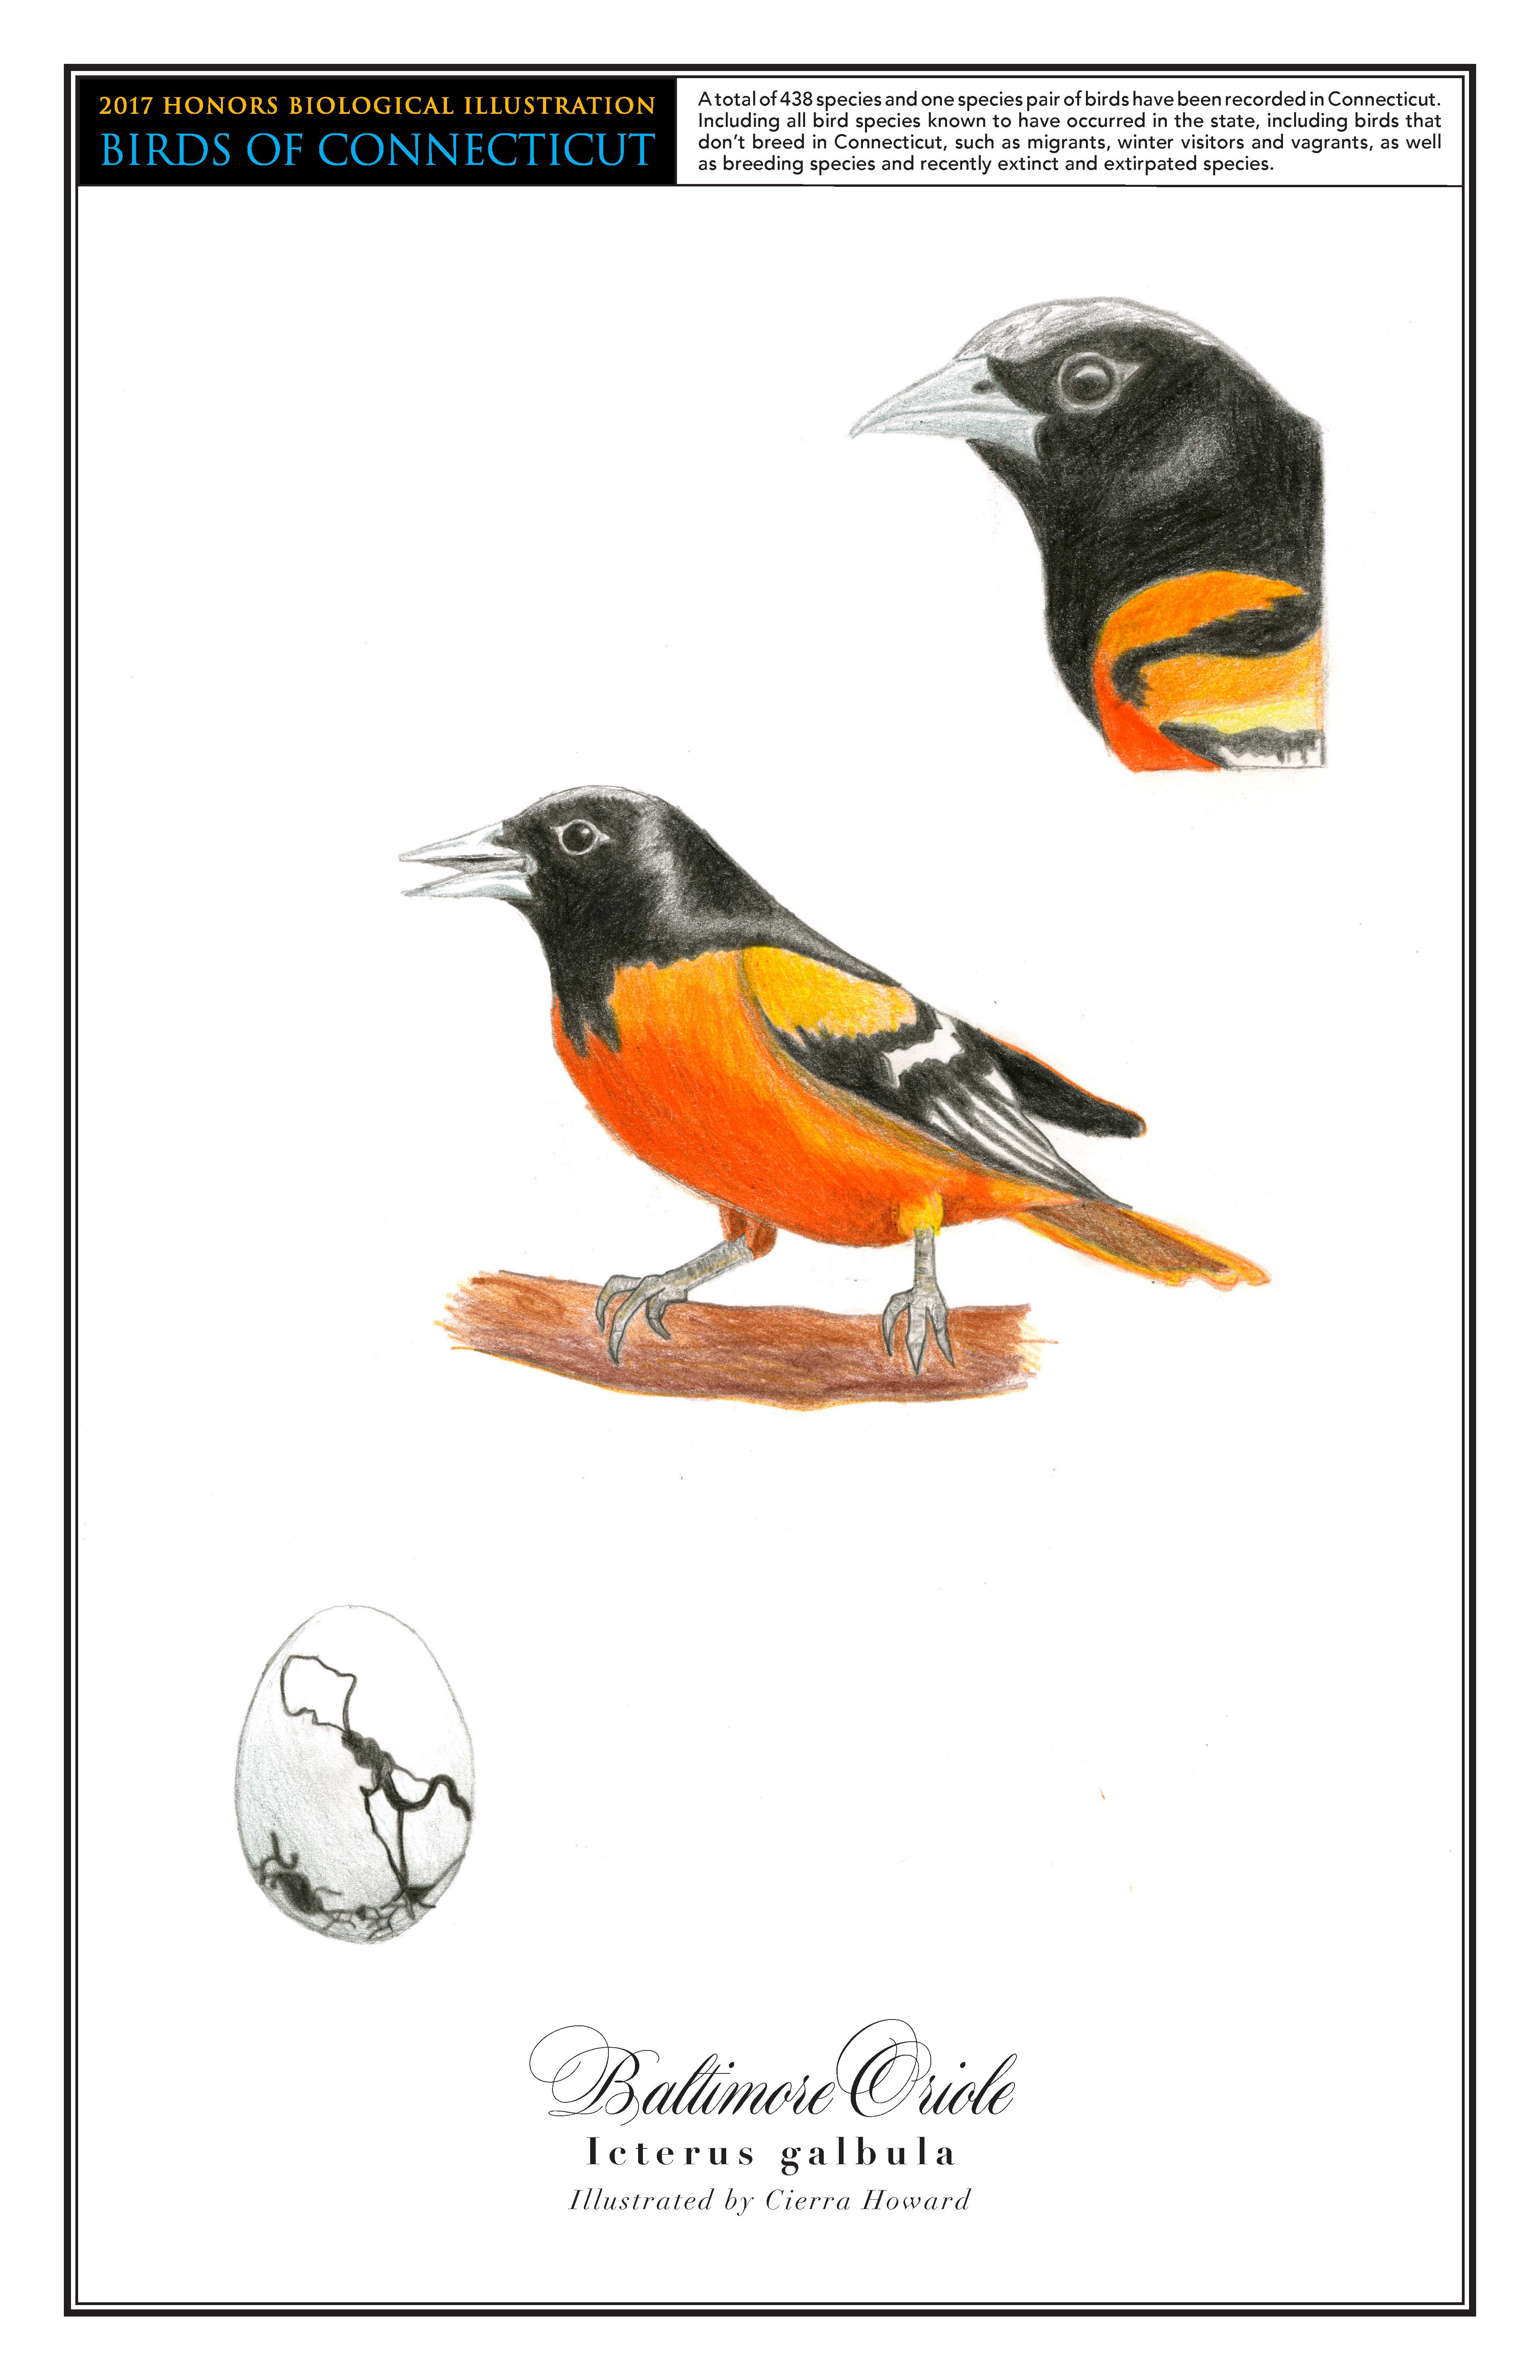 A drawing of a Baltimore Oriole, which has a black head and mostly yellow body. A drawing of the oriole perched on a branch is in the center. A close up drawing of the bird's head and upper body is in the top right. On the bottom left is a drawing of the egg, which is mostly white with a few black squiggly lines.